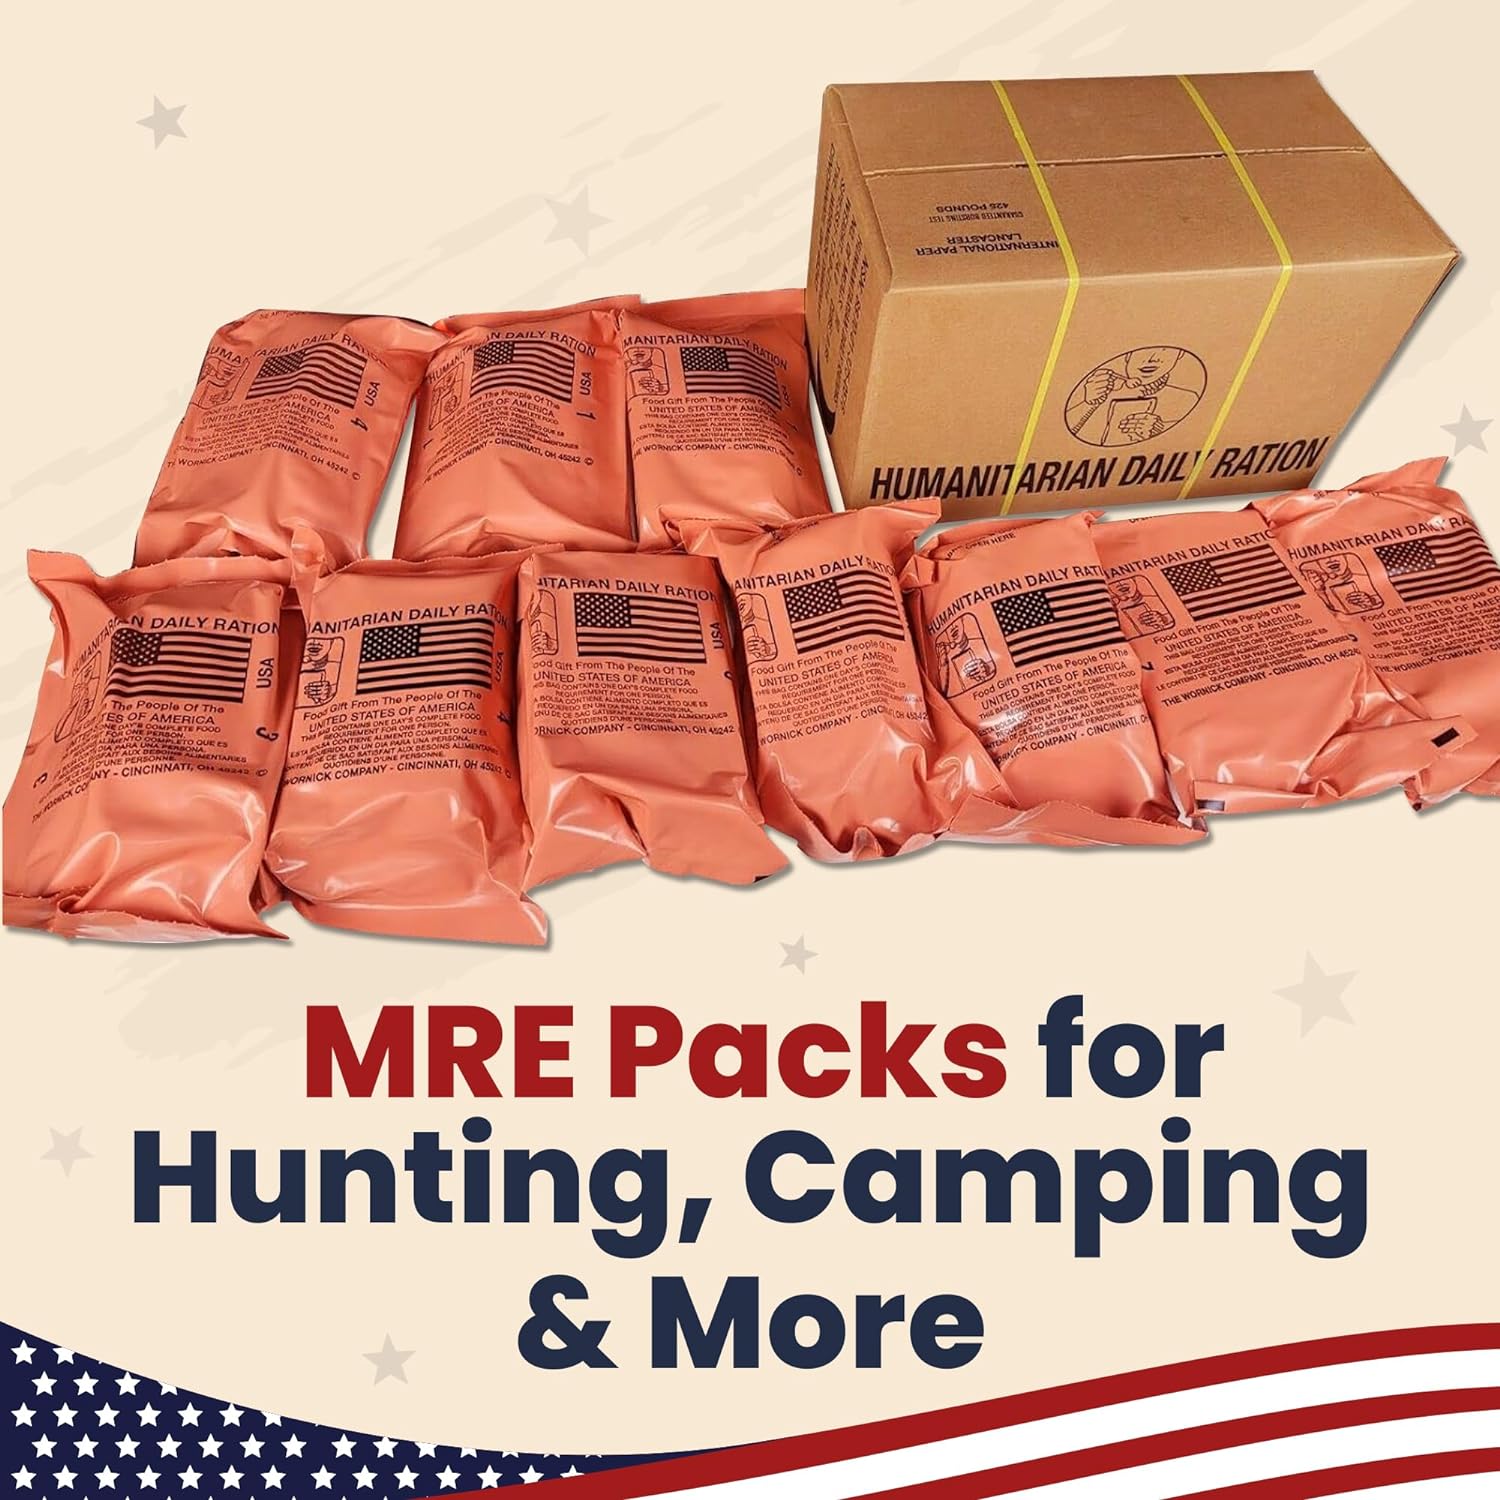 Humanitarian Daily Ration MRE Case – 5 US FEMA Emergency rations MRE Varieties - Low Sodium Pre cooked w/Entree, Side Dishes for Hunting, Camping  More, 10 pack, Inspection Date 1/2024 or Better.